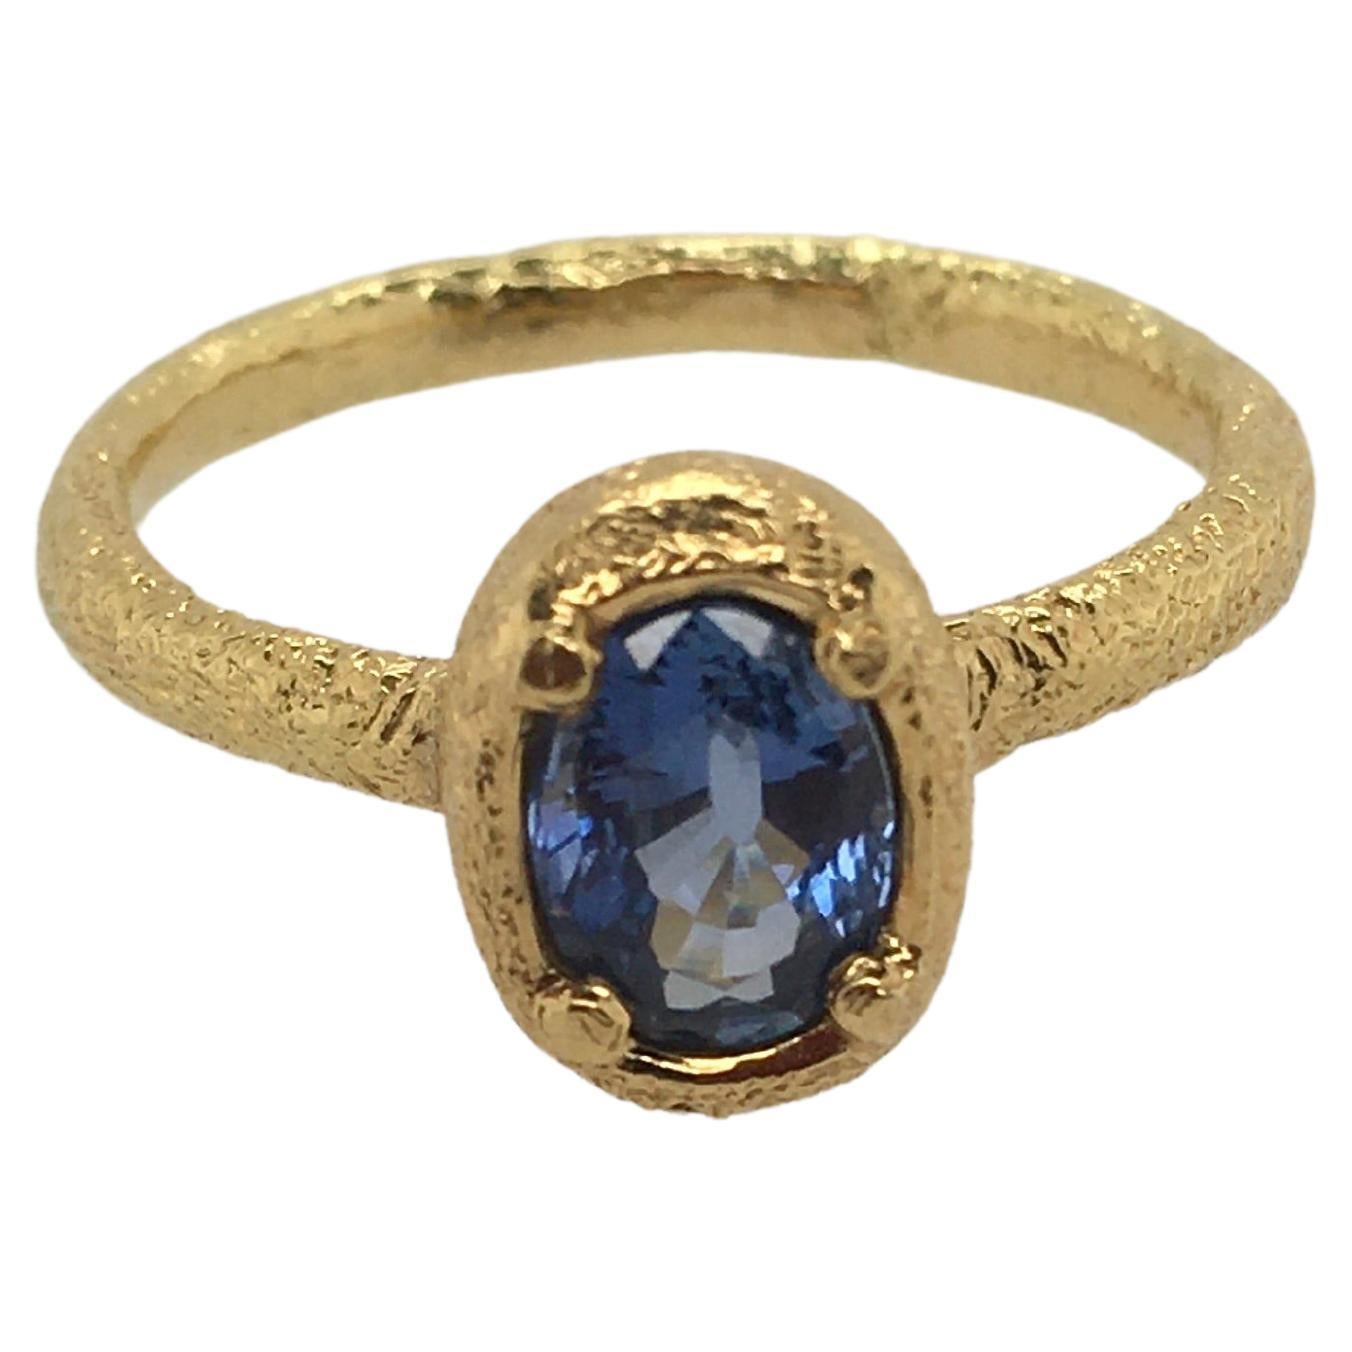 PATRICIA DAUNIS Ceylon Blue Sapphire Set in Hand-textured Gold Atuik Ring  For Sale